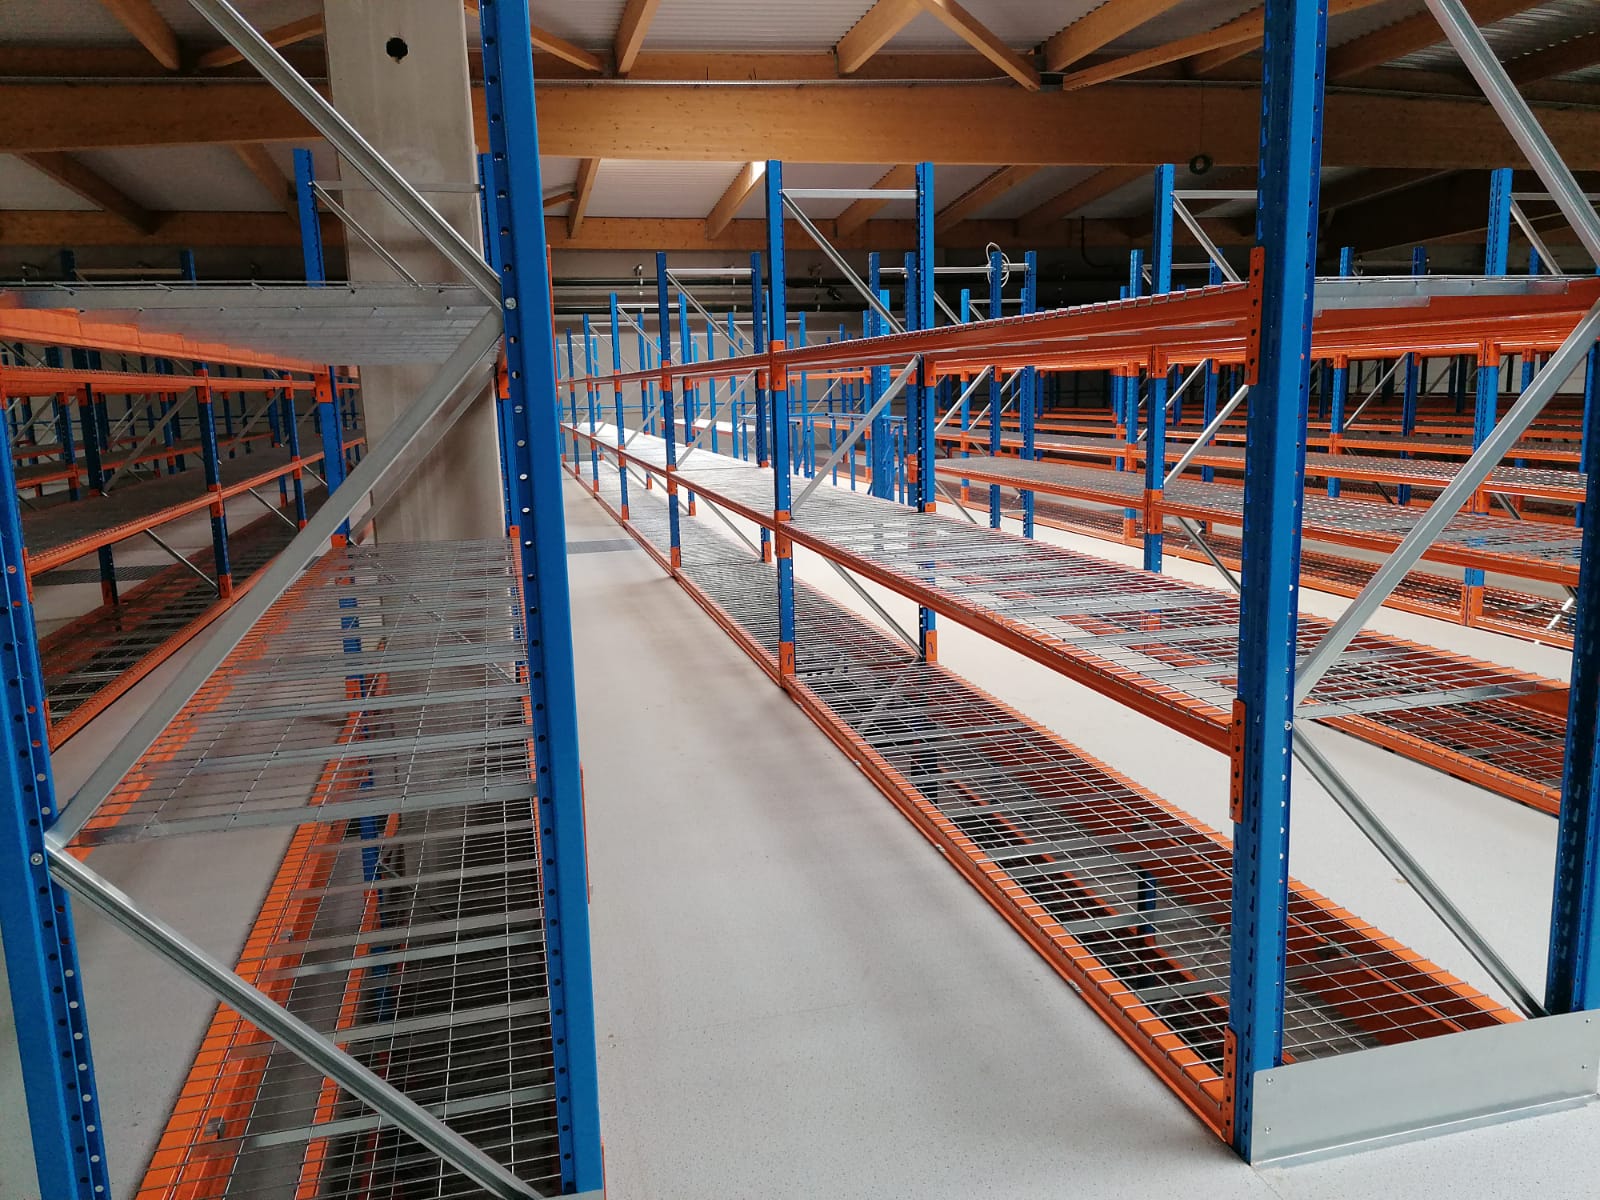 Mezza stow® solution in warehouse